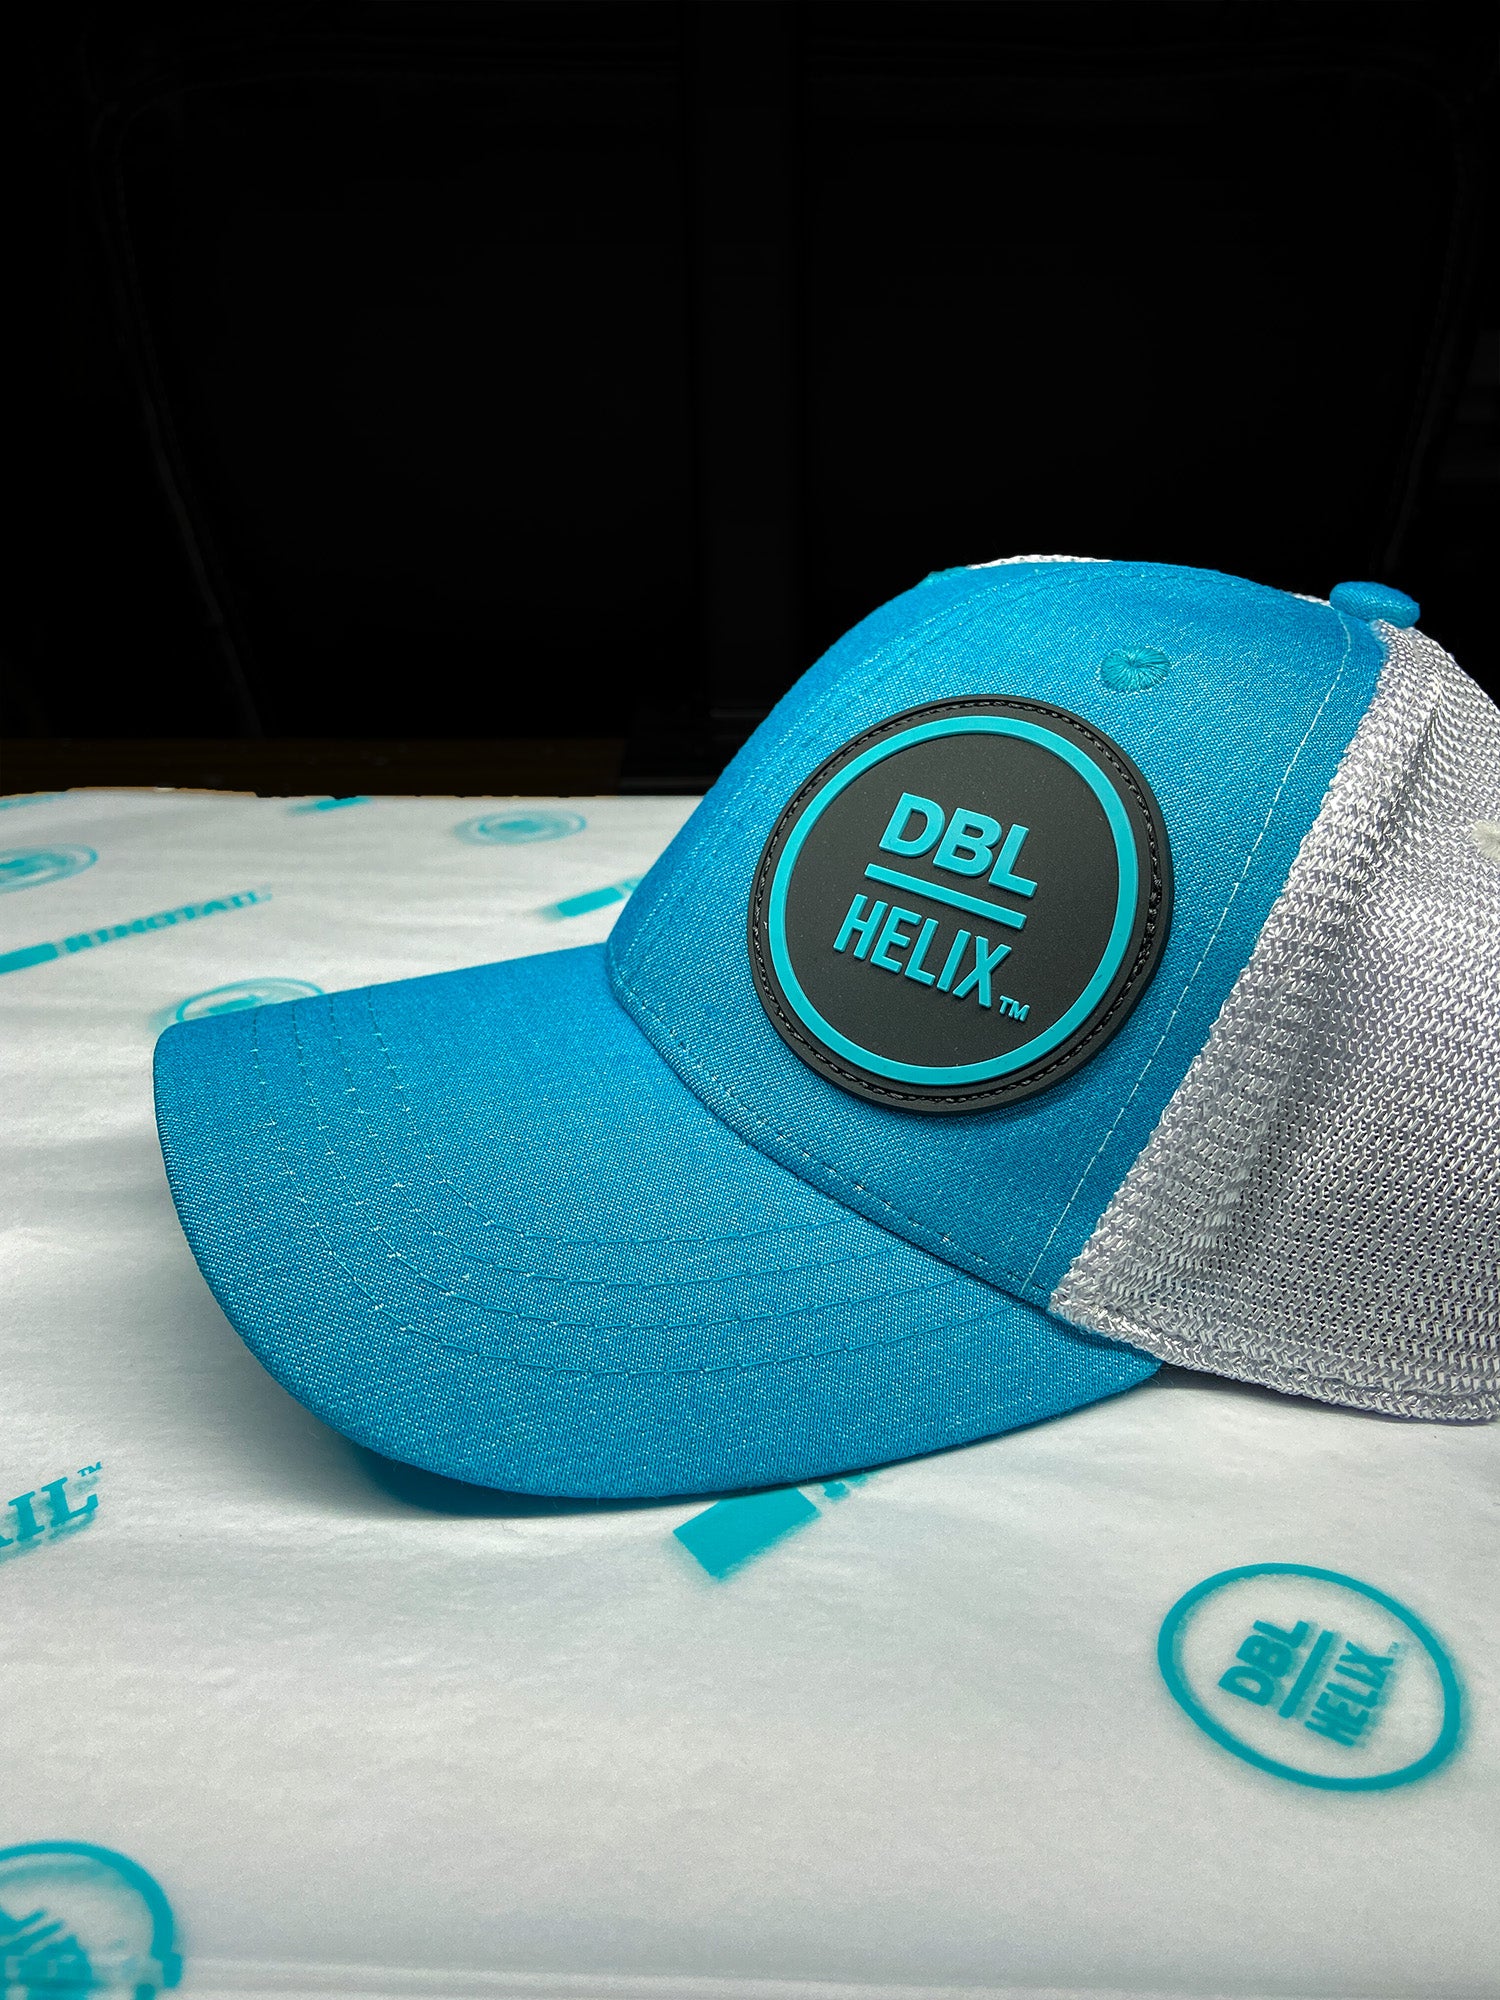 DBL Helix Rubber Patch Teal-White Cap